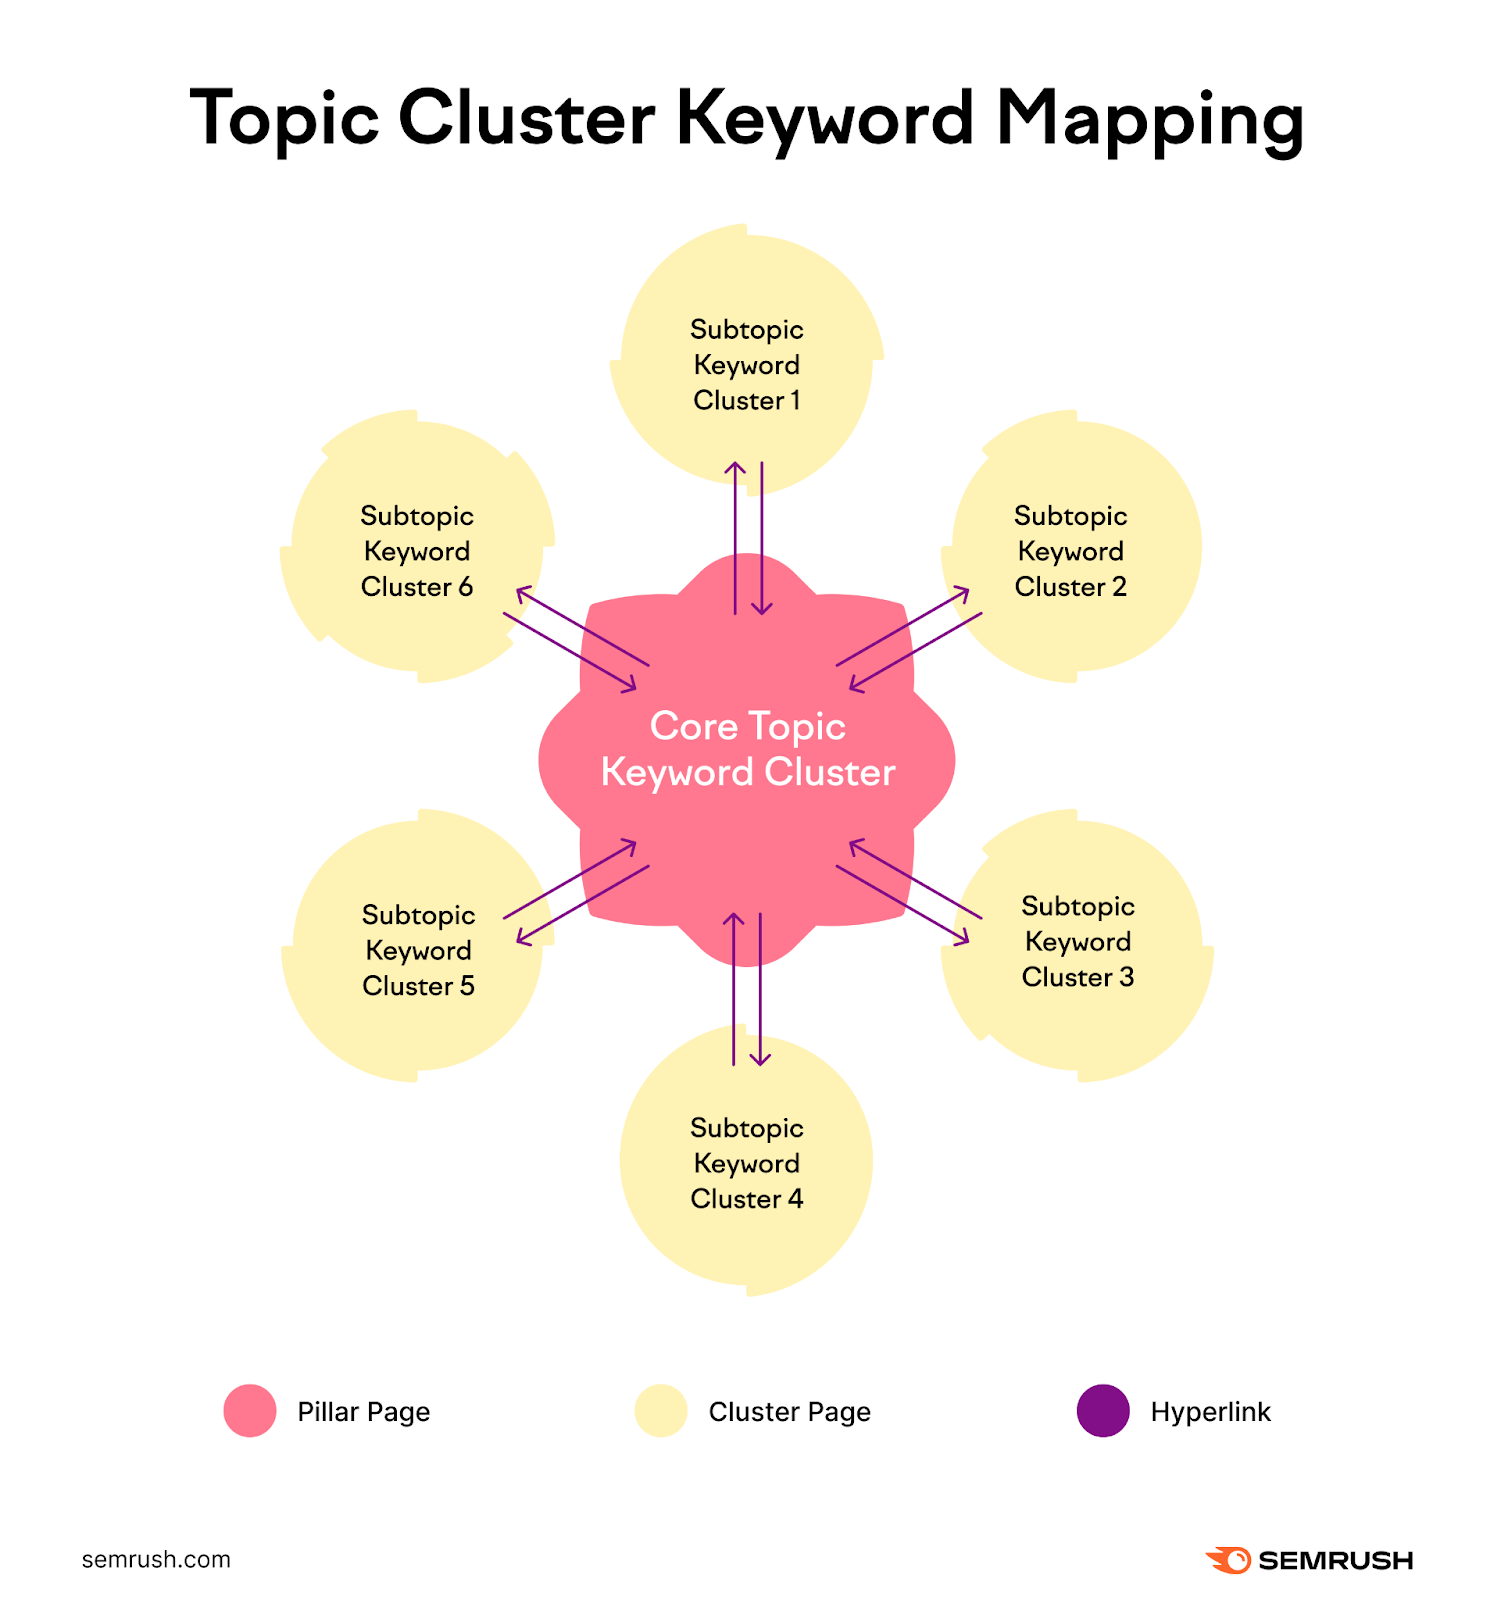 A mind map with a Core Topic Keyword Cluster at the center, with links pointing to and from several Subtopic Keyword Clusters